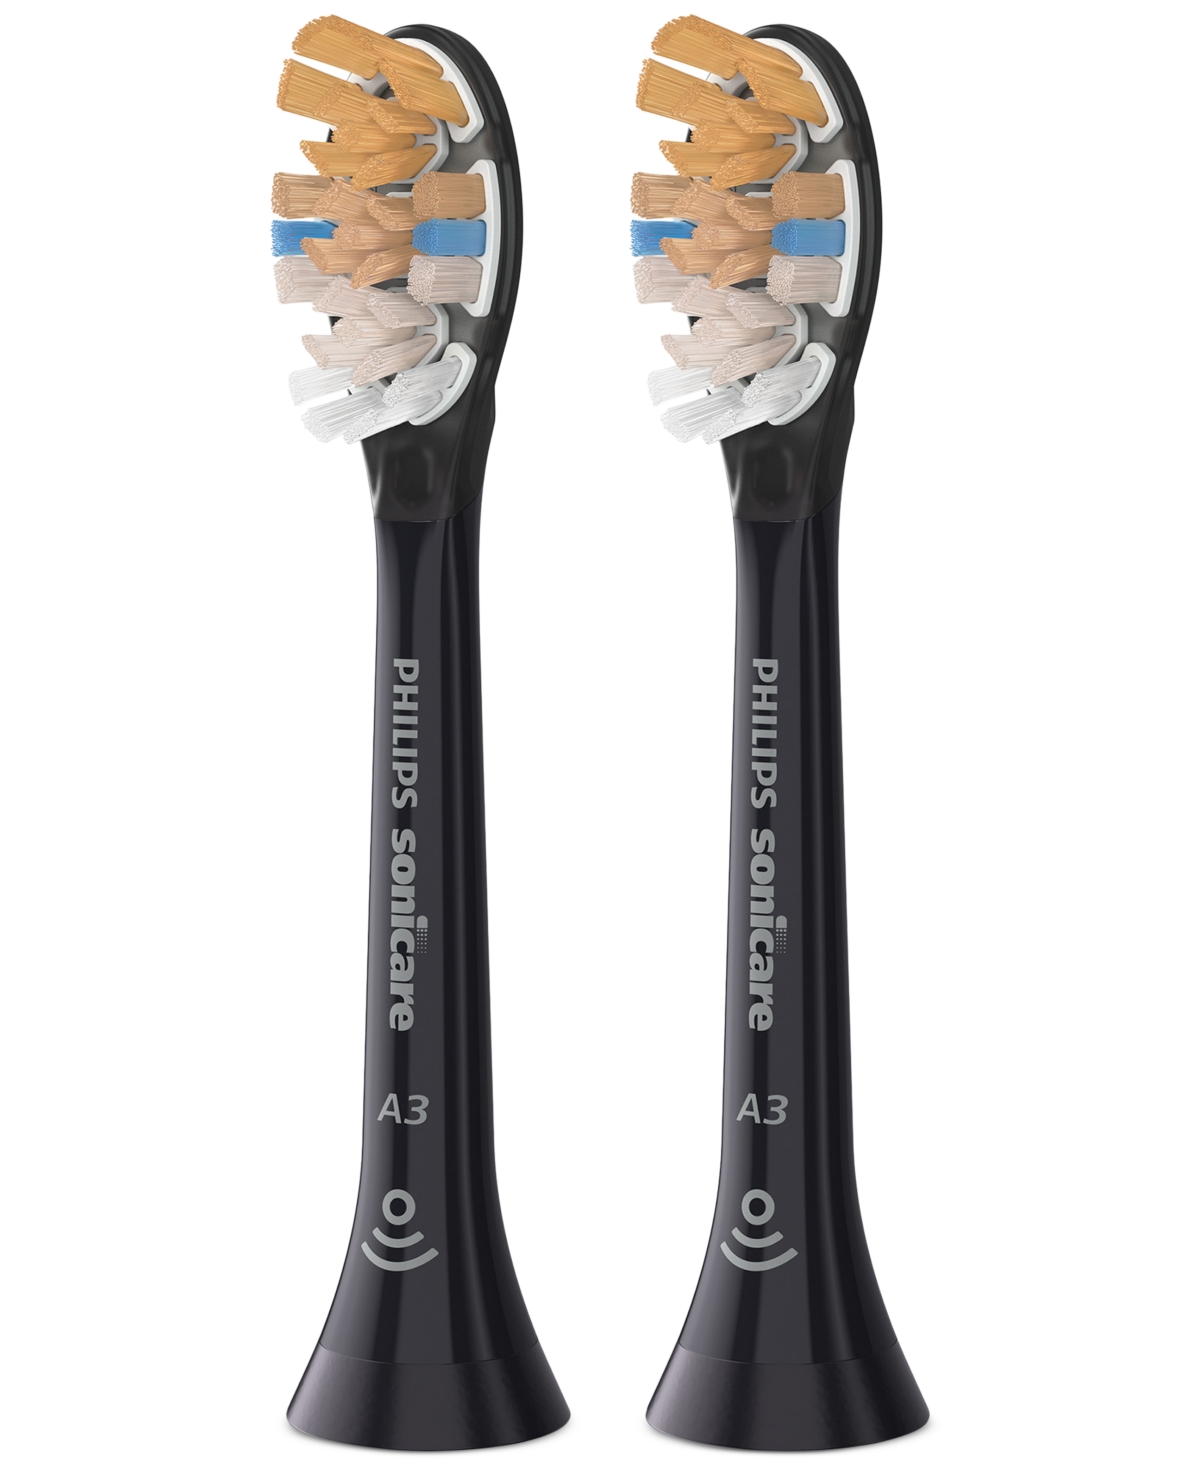 Philips 2-pk. Sonicare Premium A3 All-in-one Brush Heads In Black